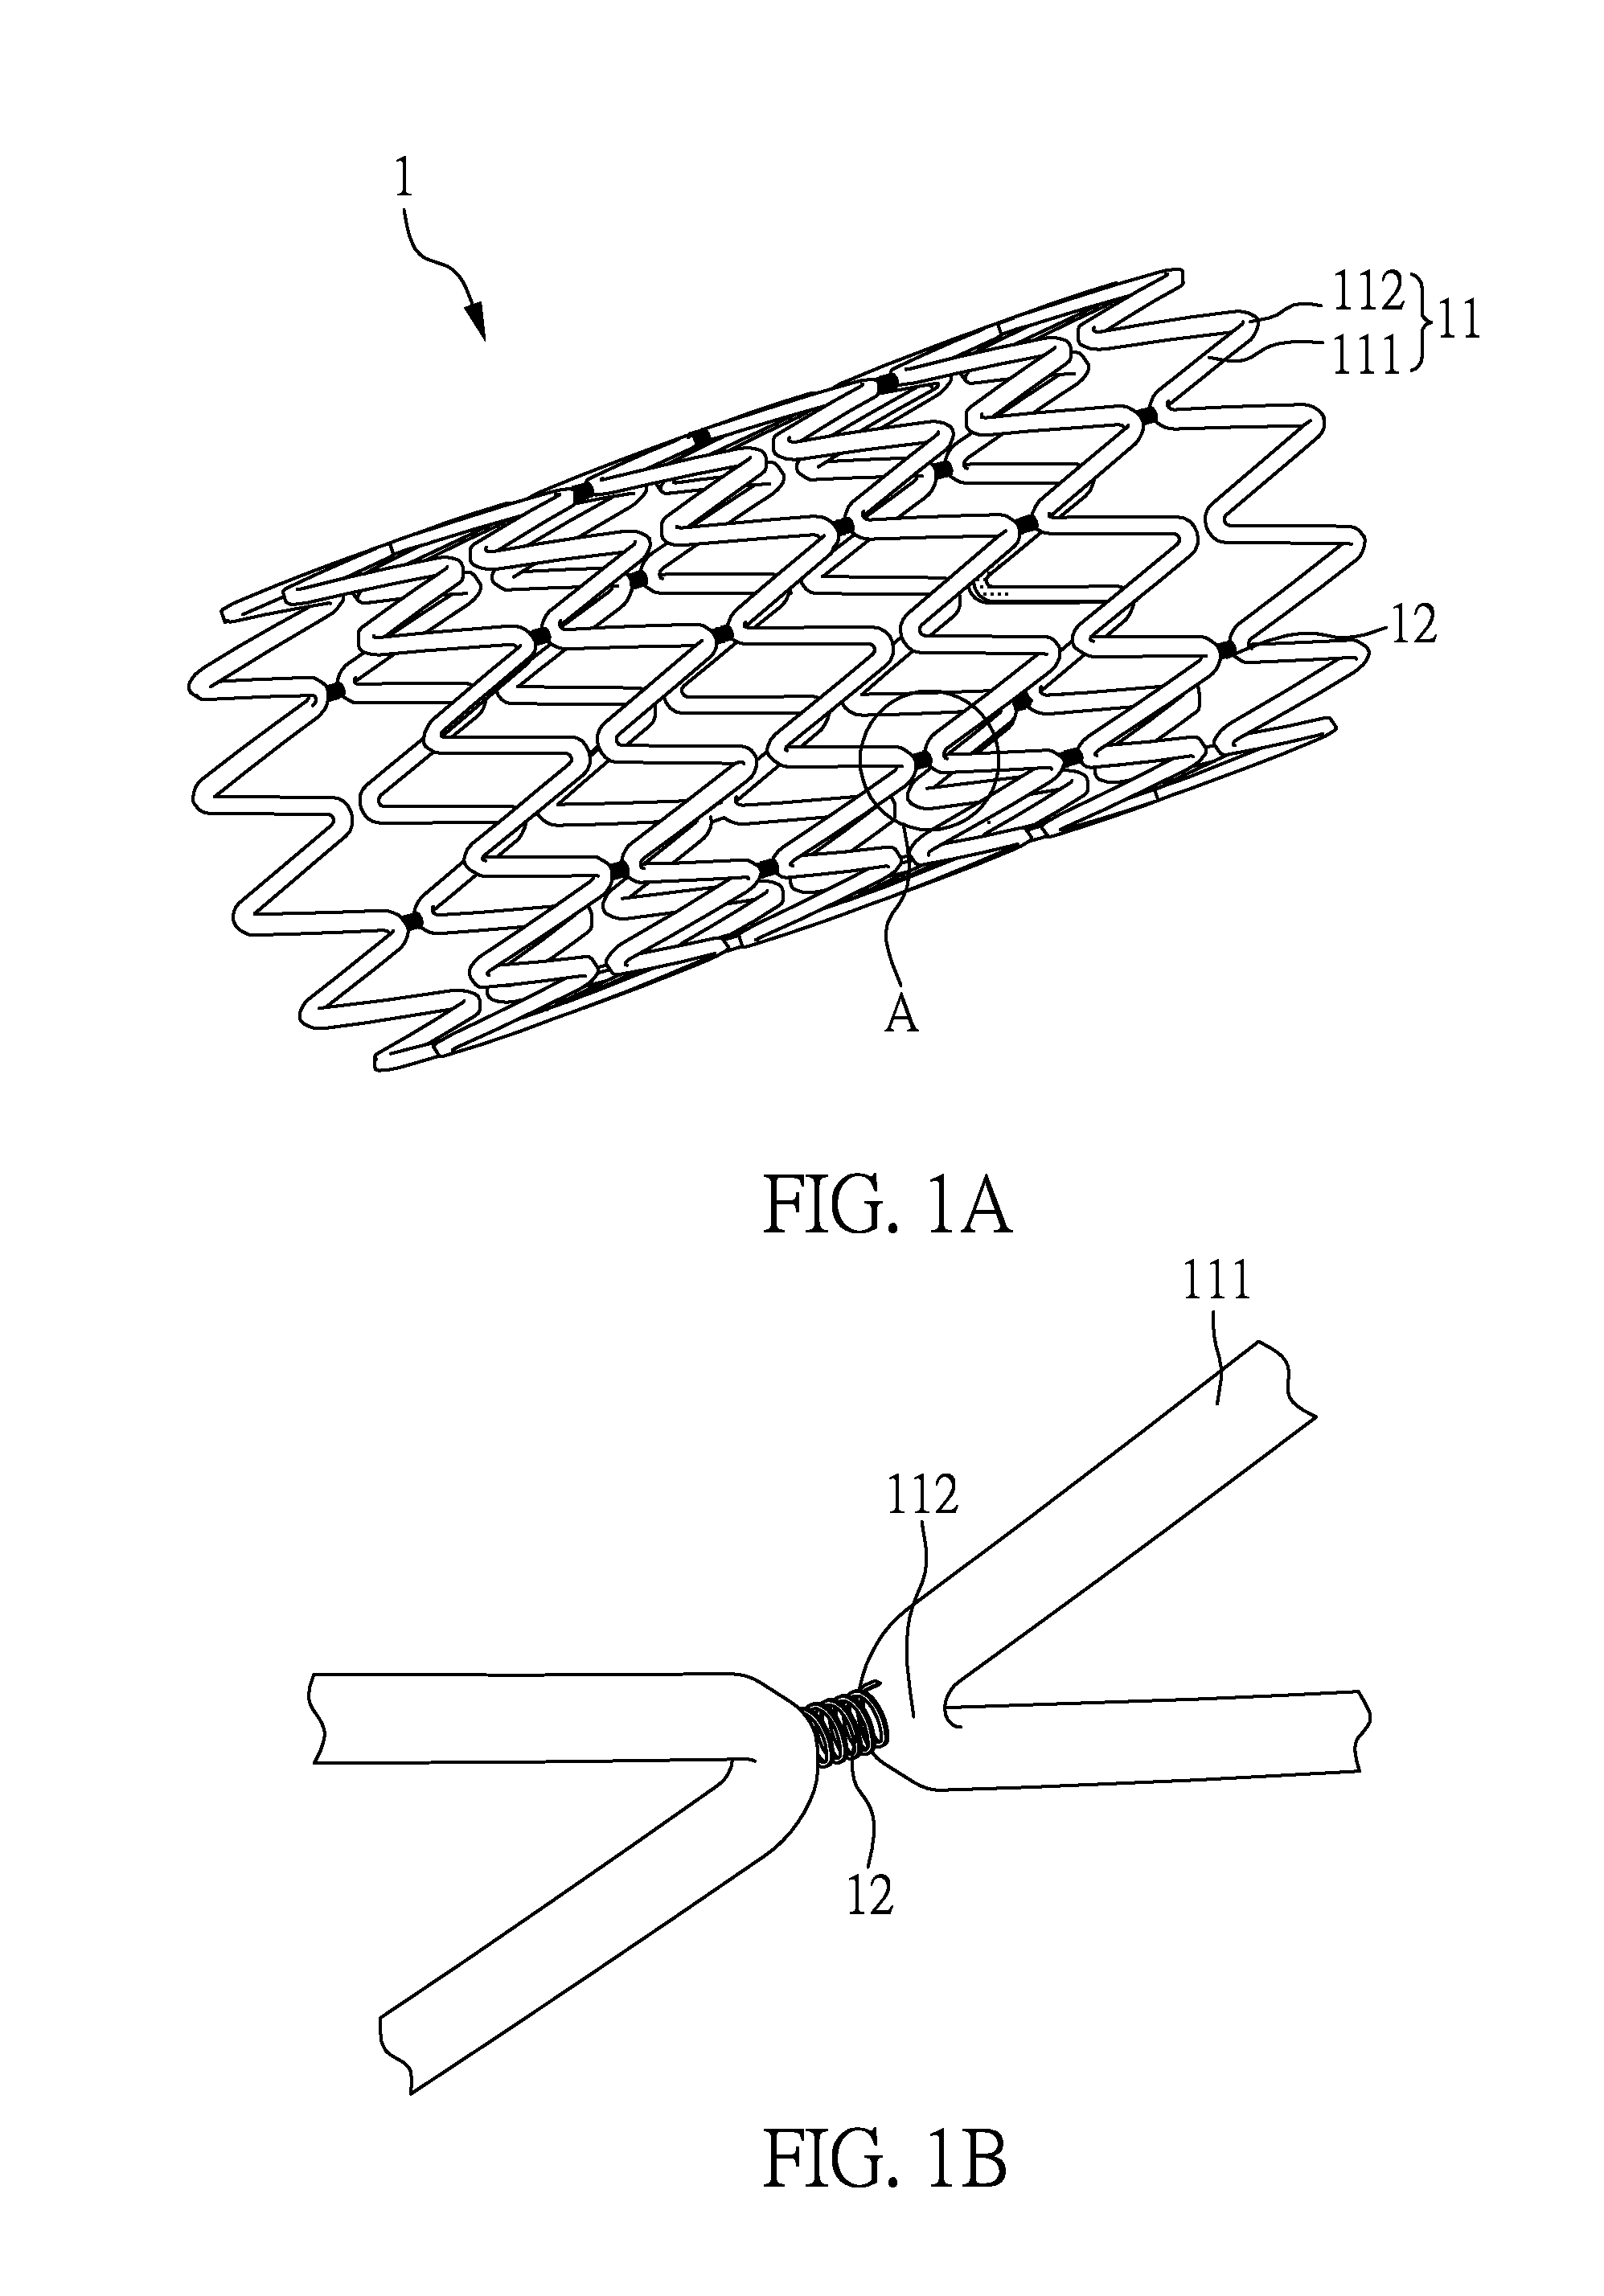 Intravascular stent with helical struts and specific cross-sectional shapes